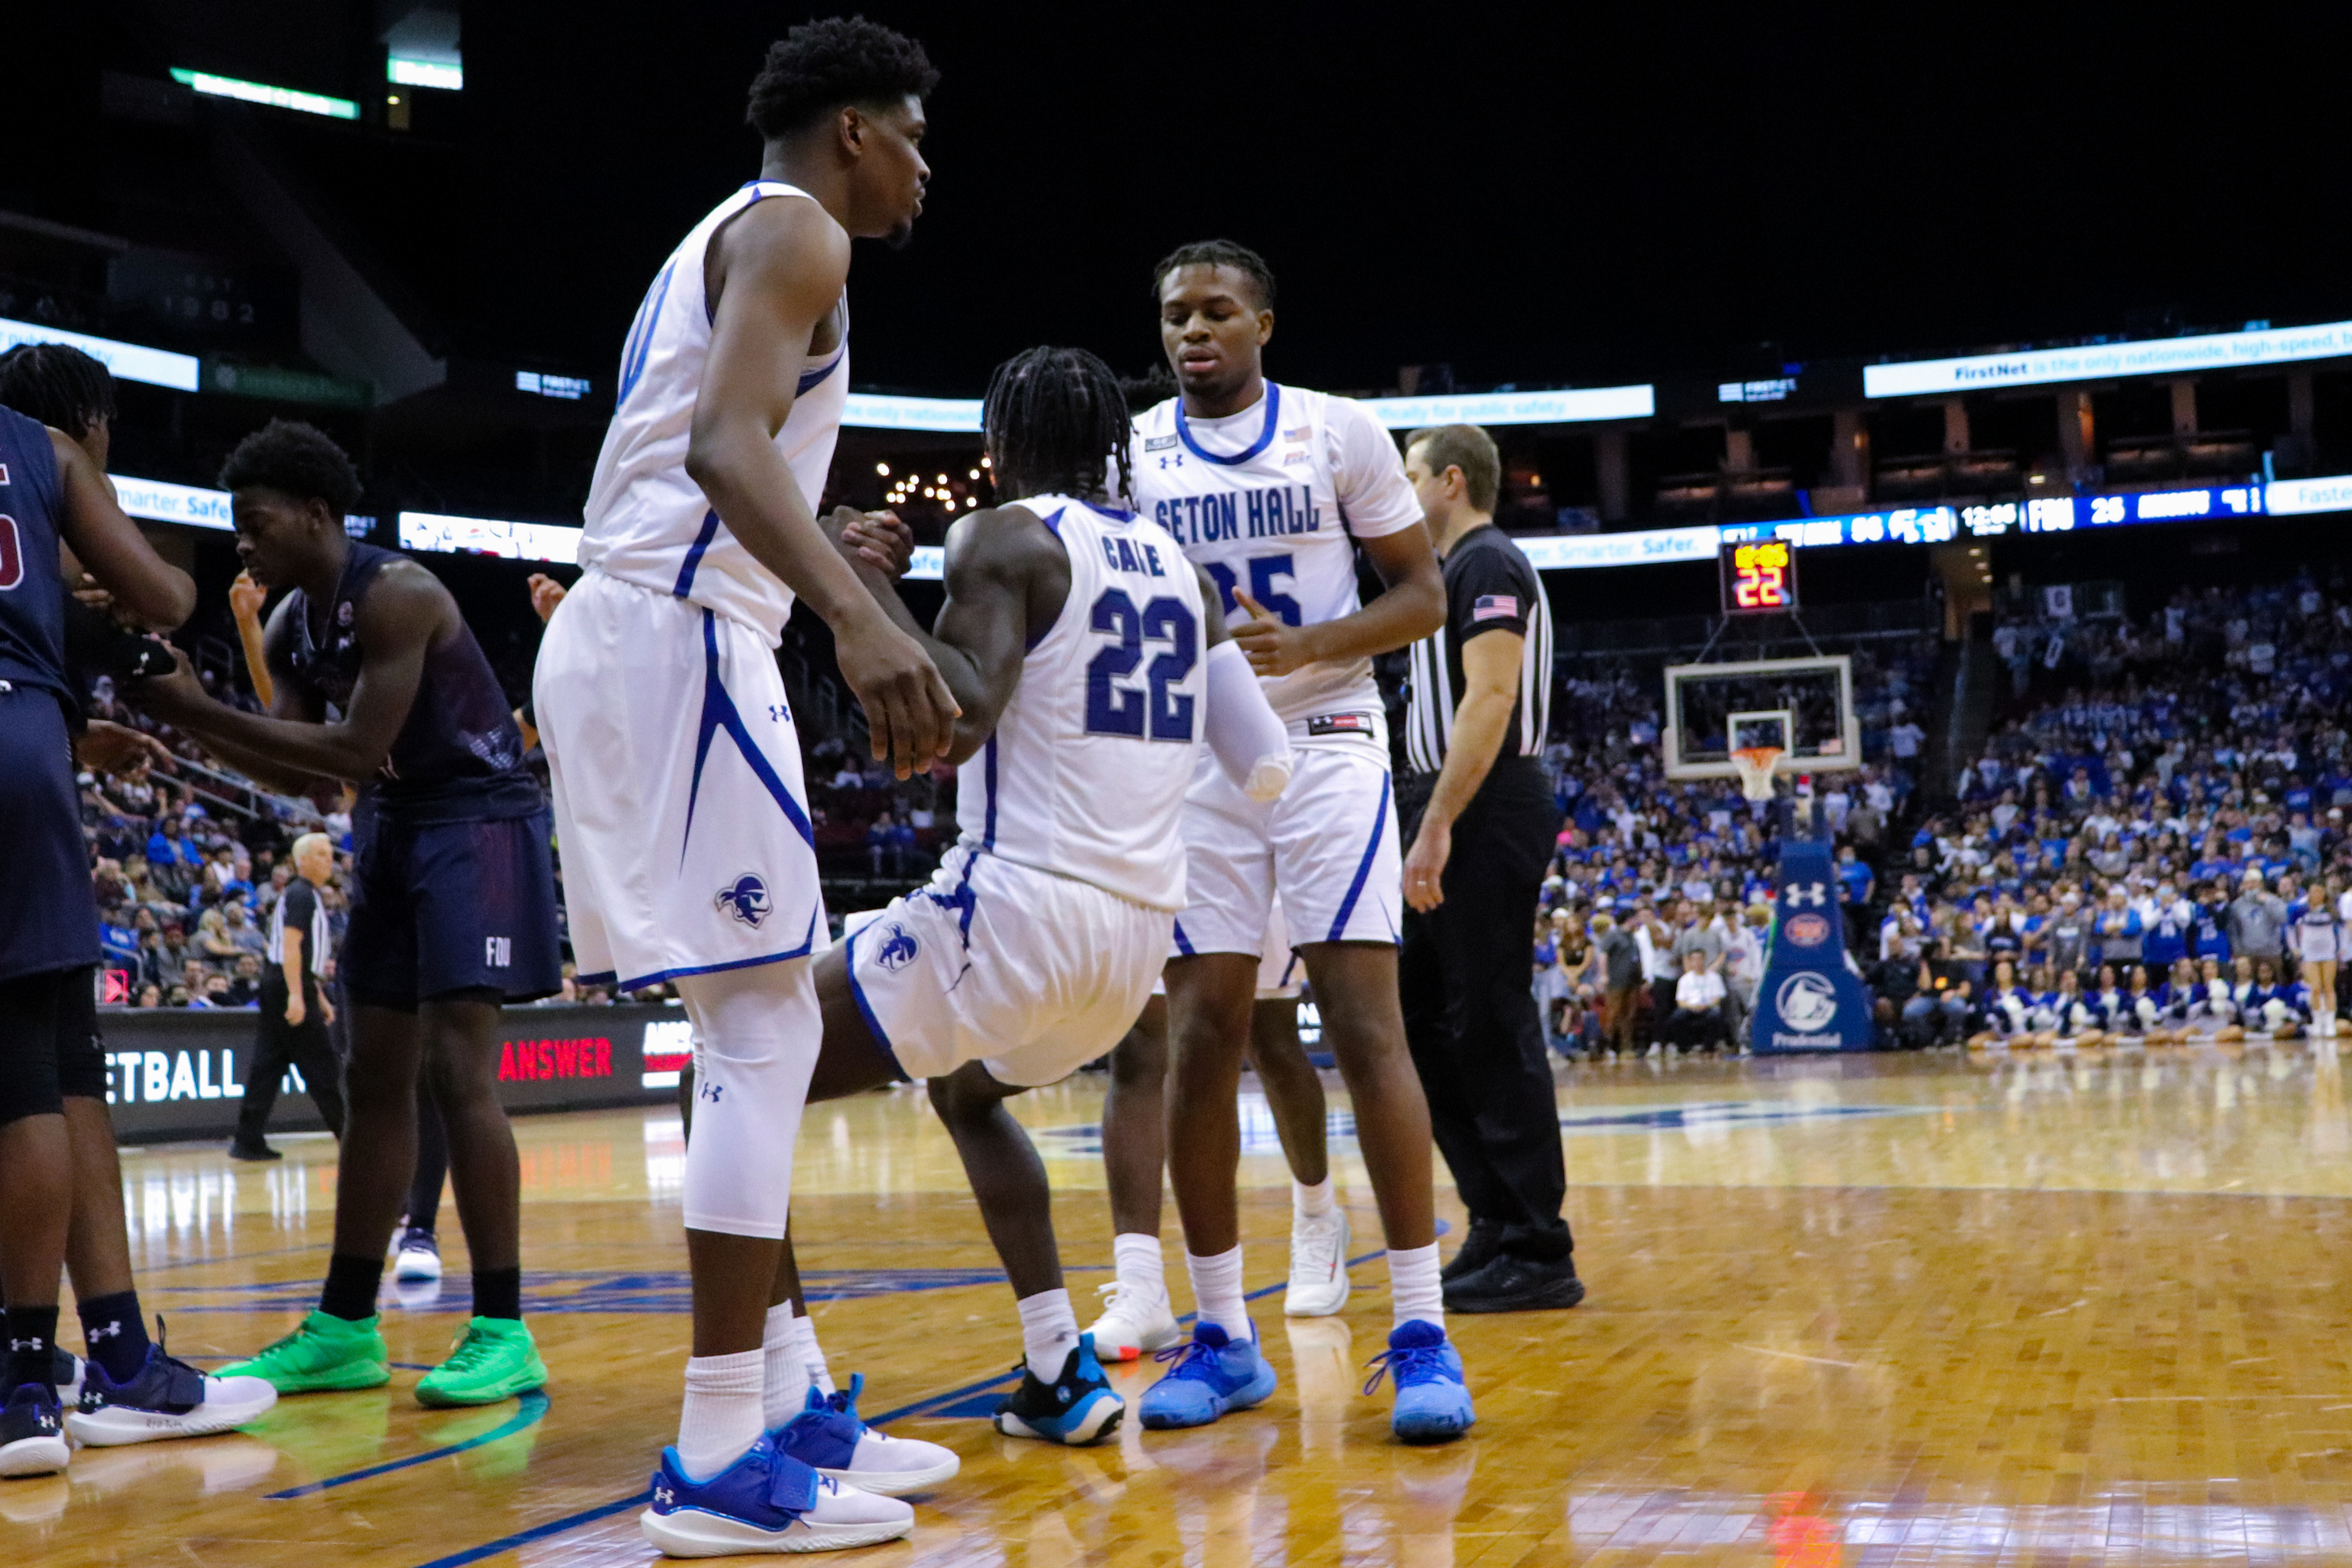 Two Seton Hall men's basketball teammates help another one stand up during a home game.